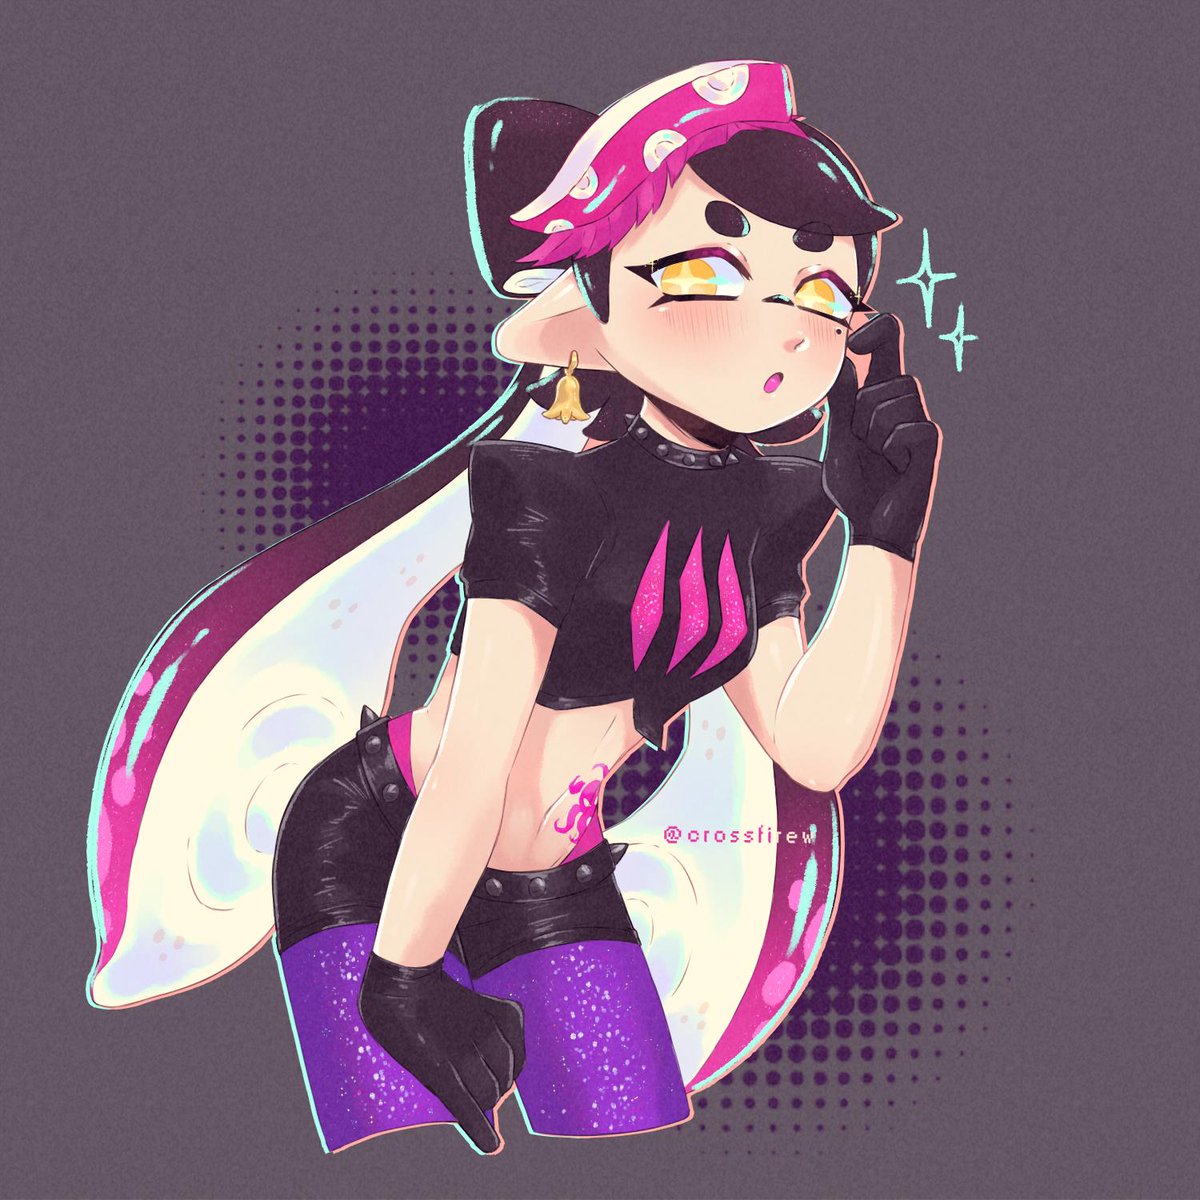 Icon for free use just be sure to credit me if used #Splatoon2 #Splatoon RT...